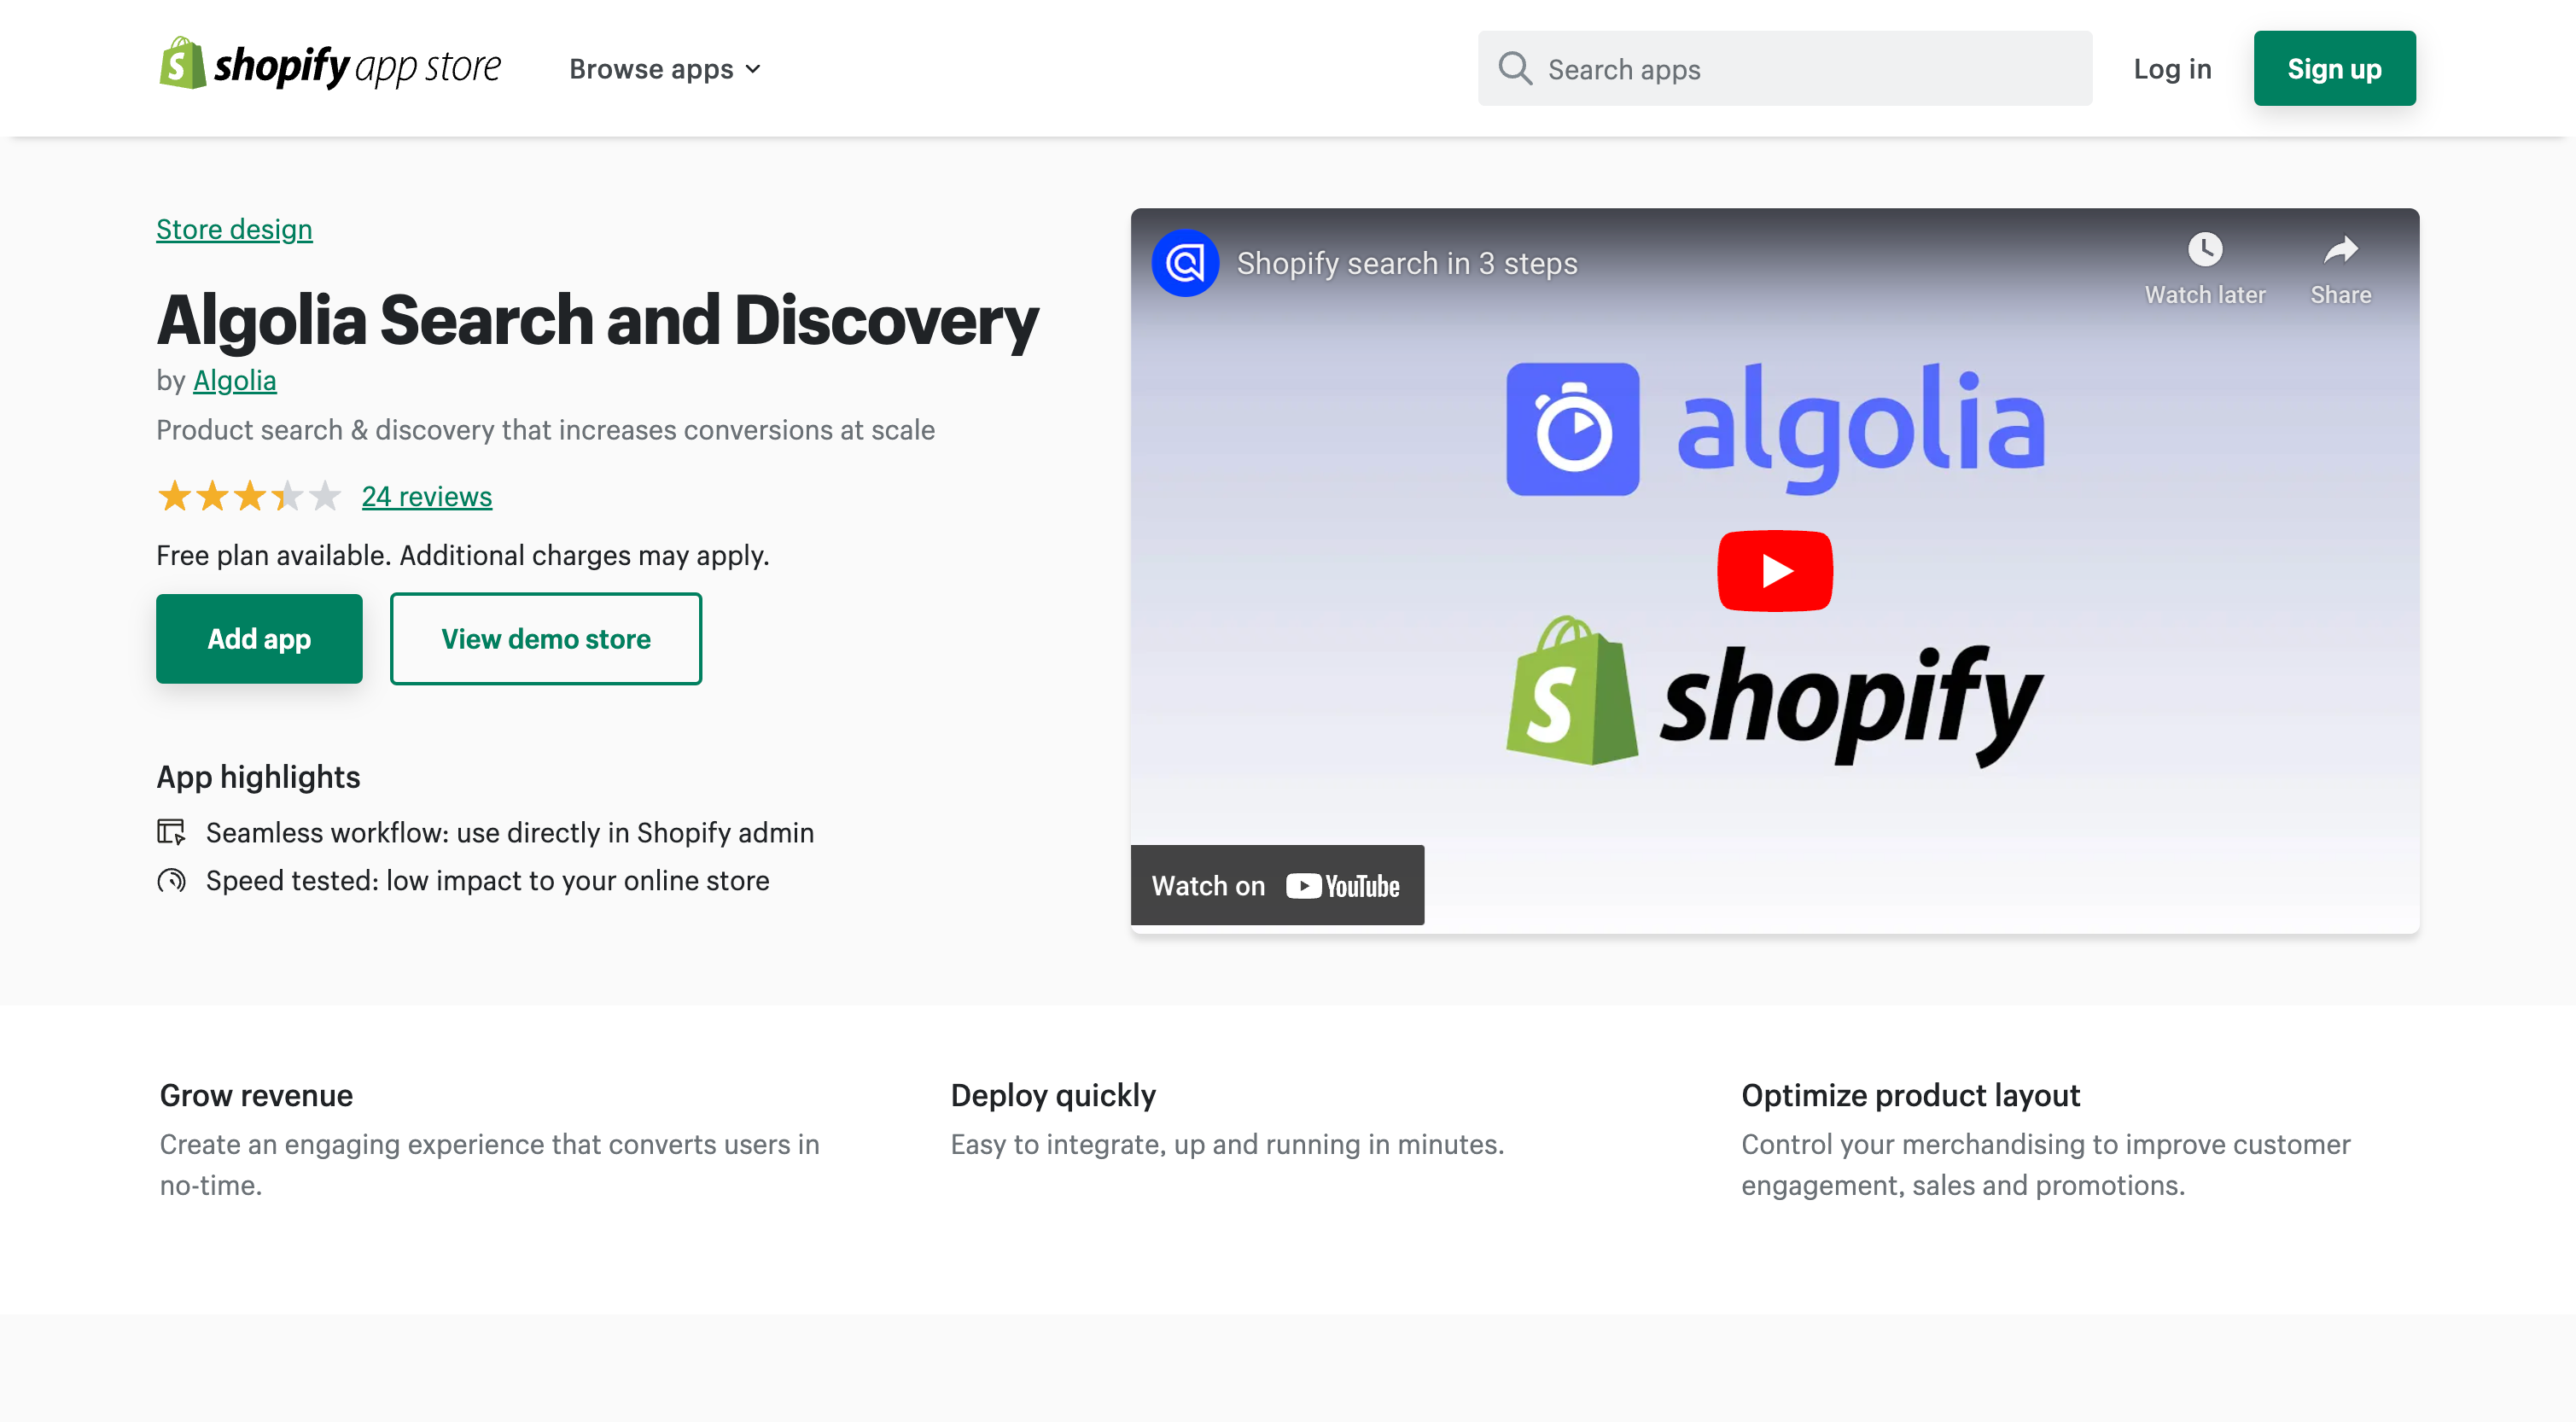 Algolia Search and Discovery - Product search & discovery that increases conversions at scale | Shopify App Store